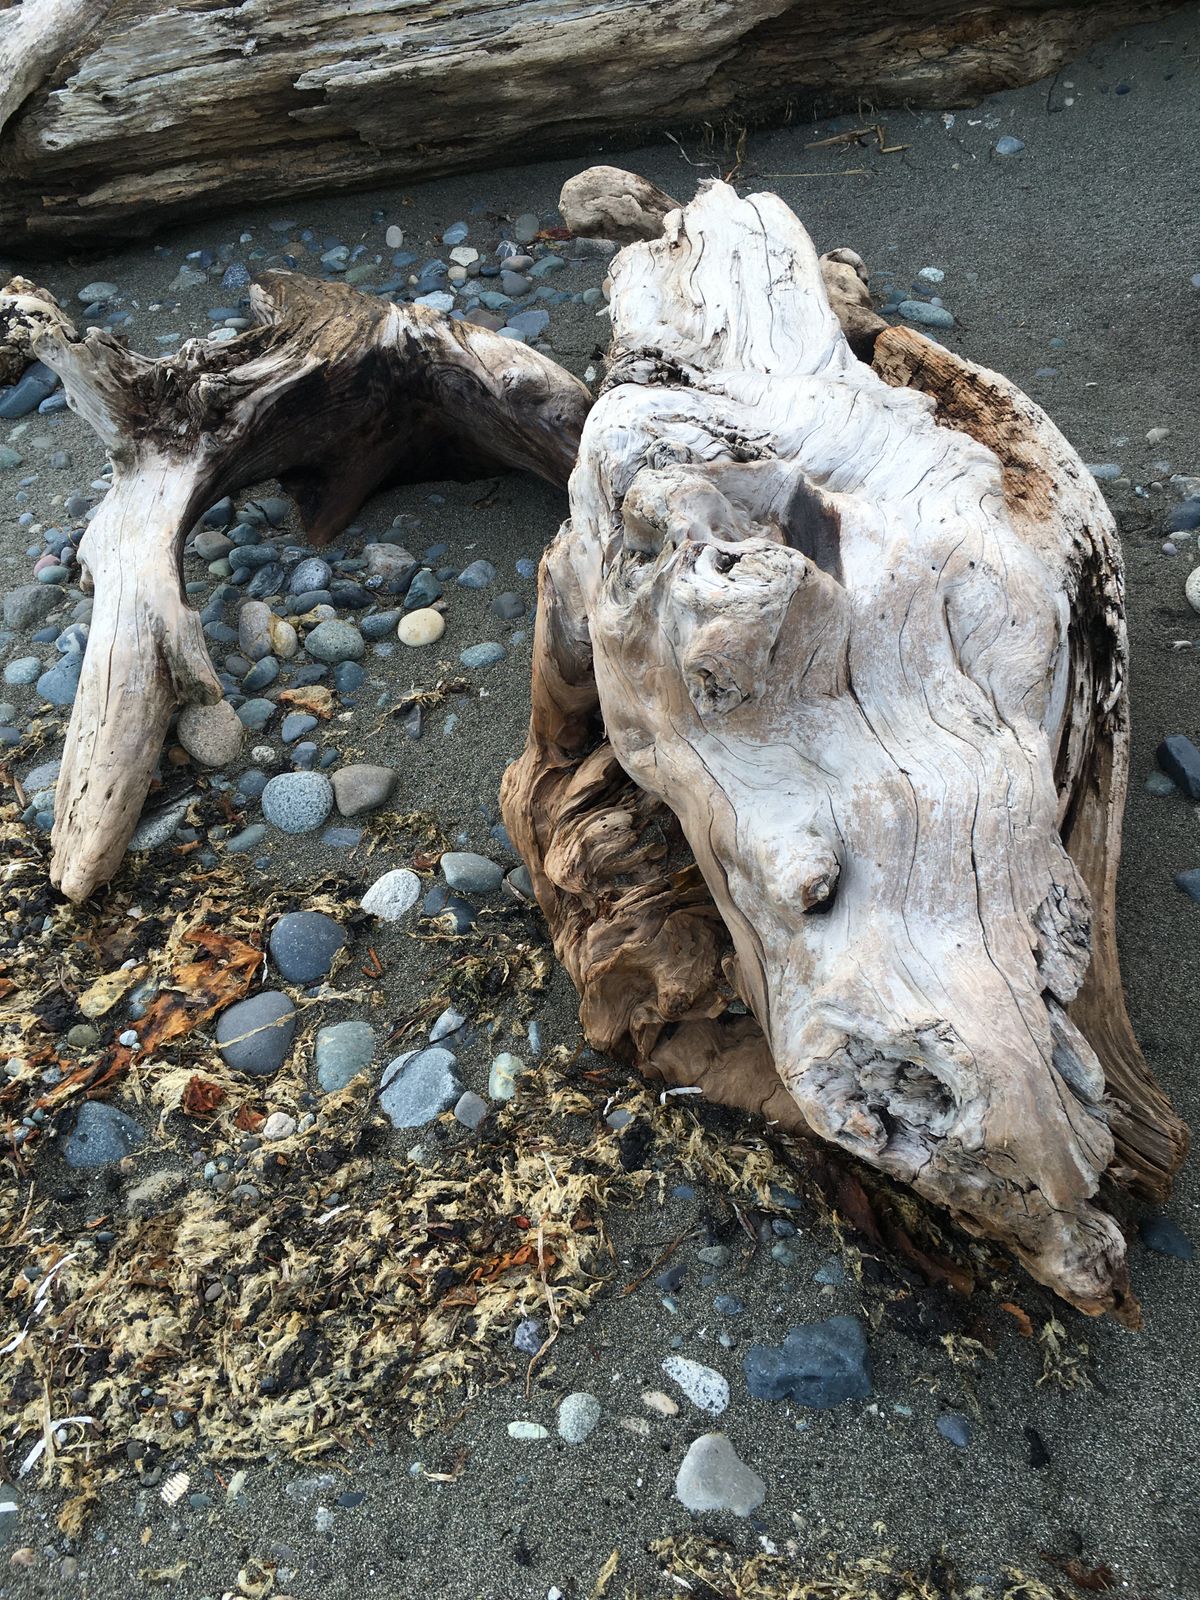 somewhat skull- and bone-shaped medium-sized driftwood lays atop sand along with rocks and dried kelp detritus 